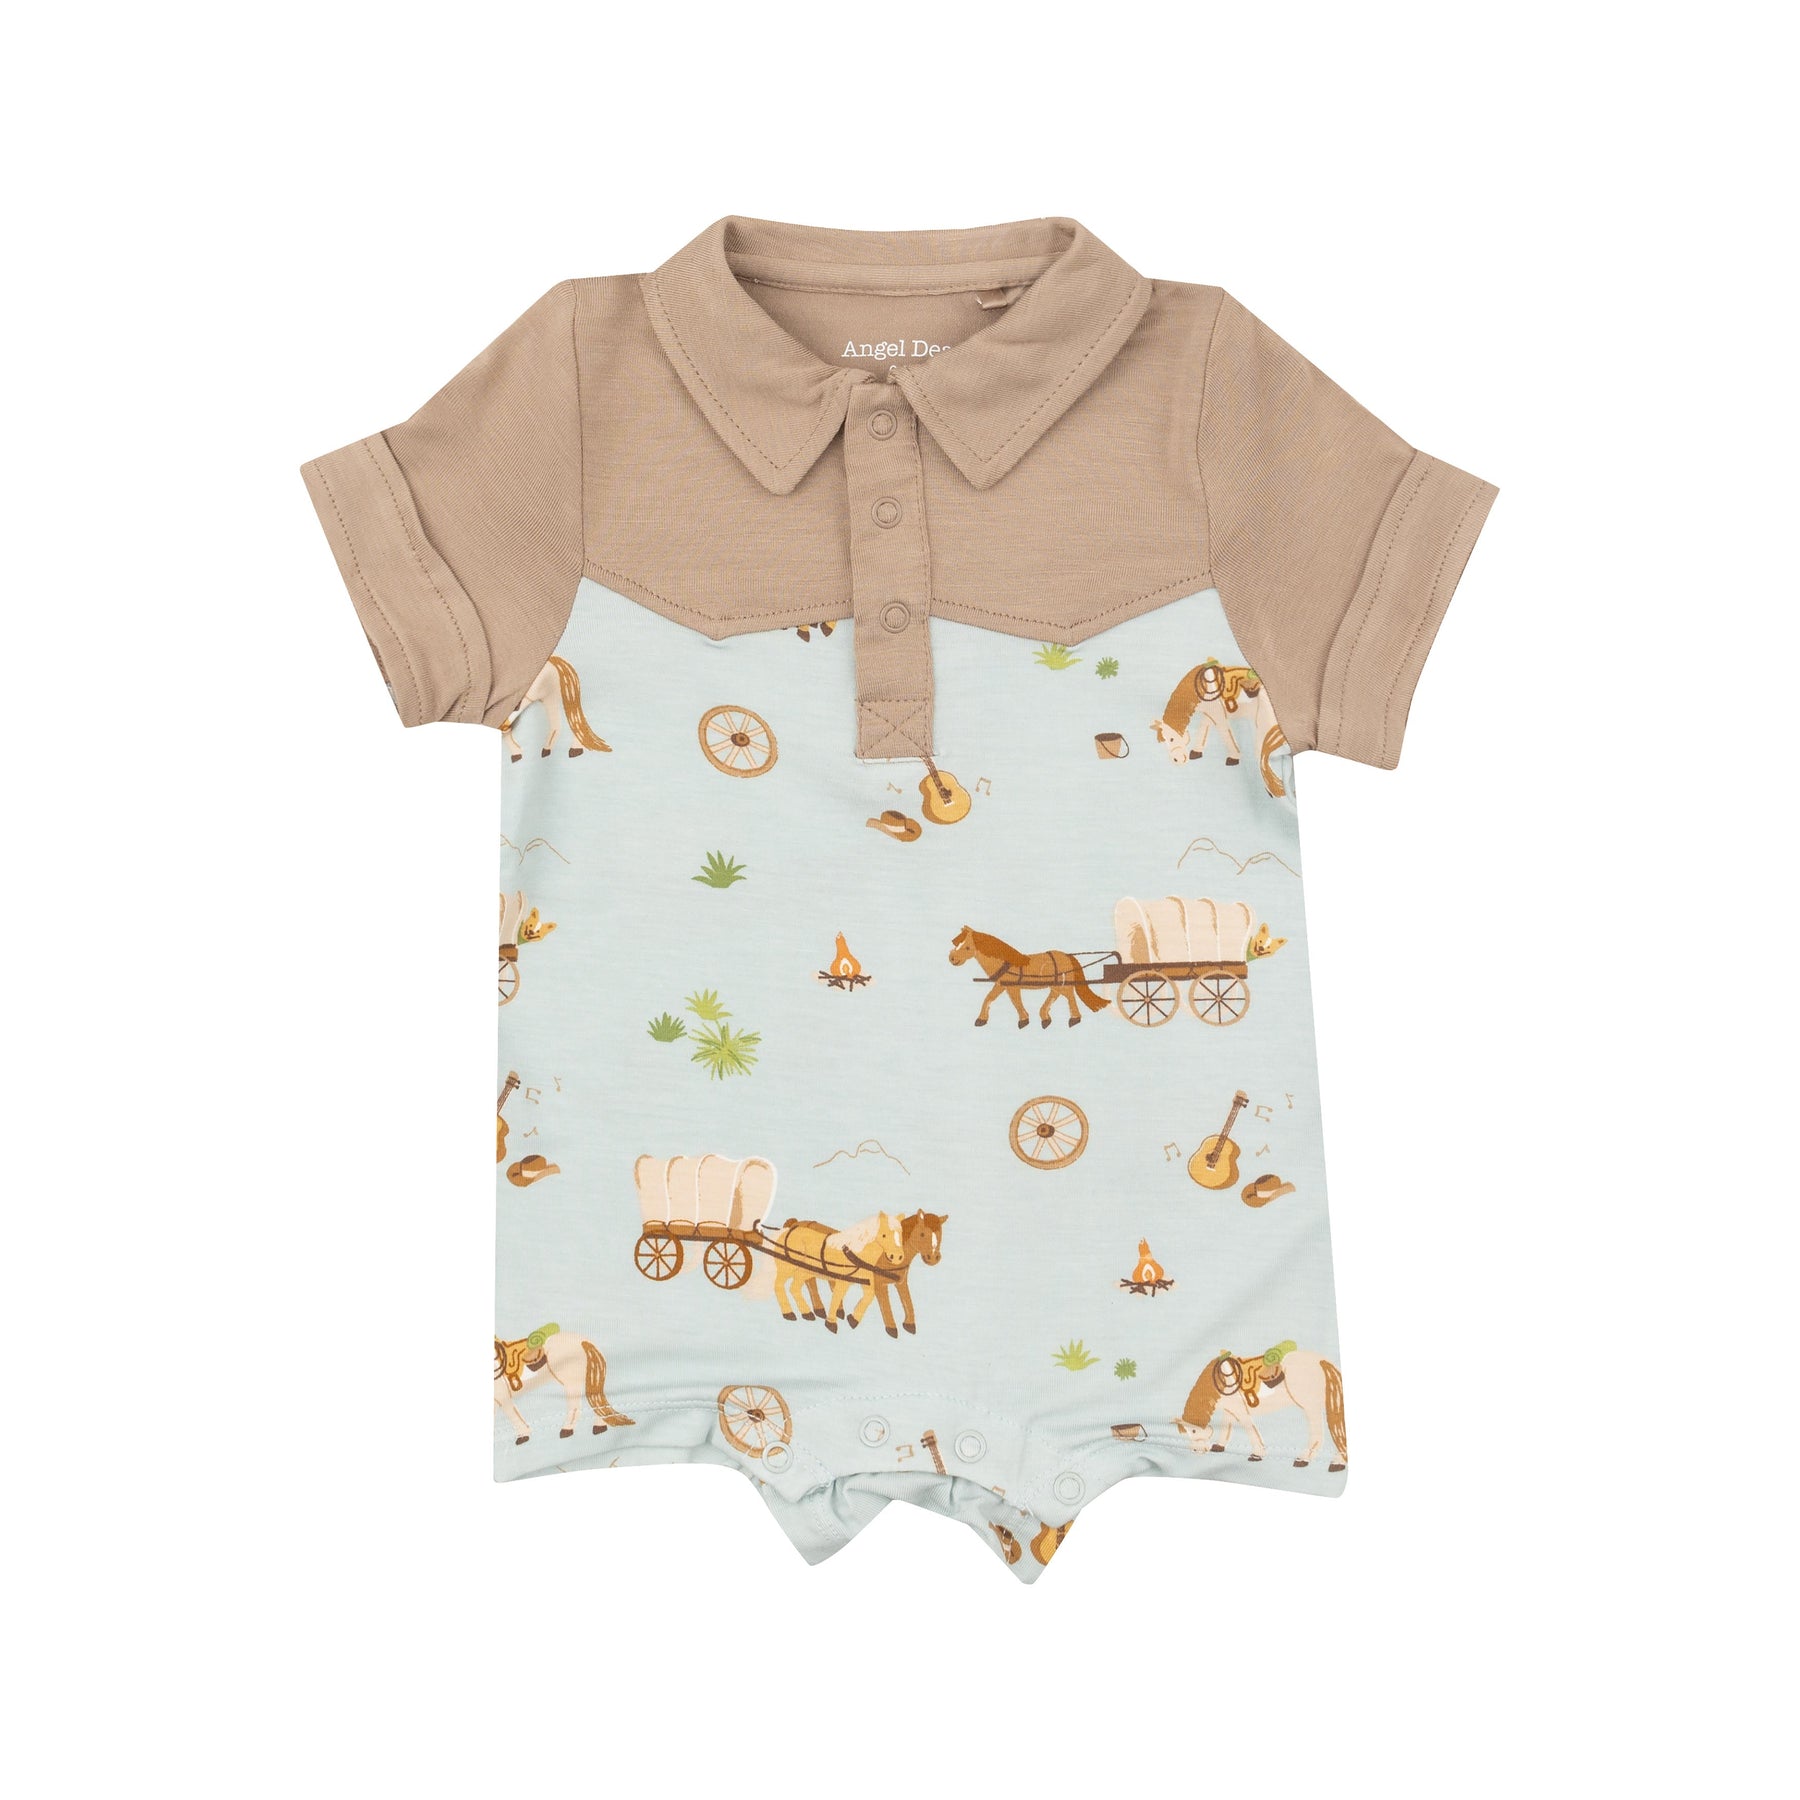 Covered Wagon Bamboo Cowboy Shortie